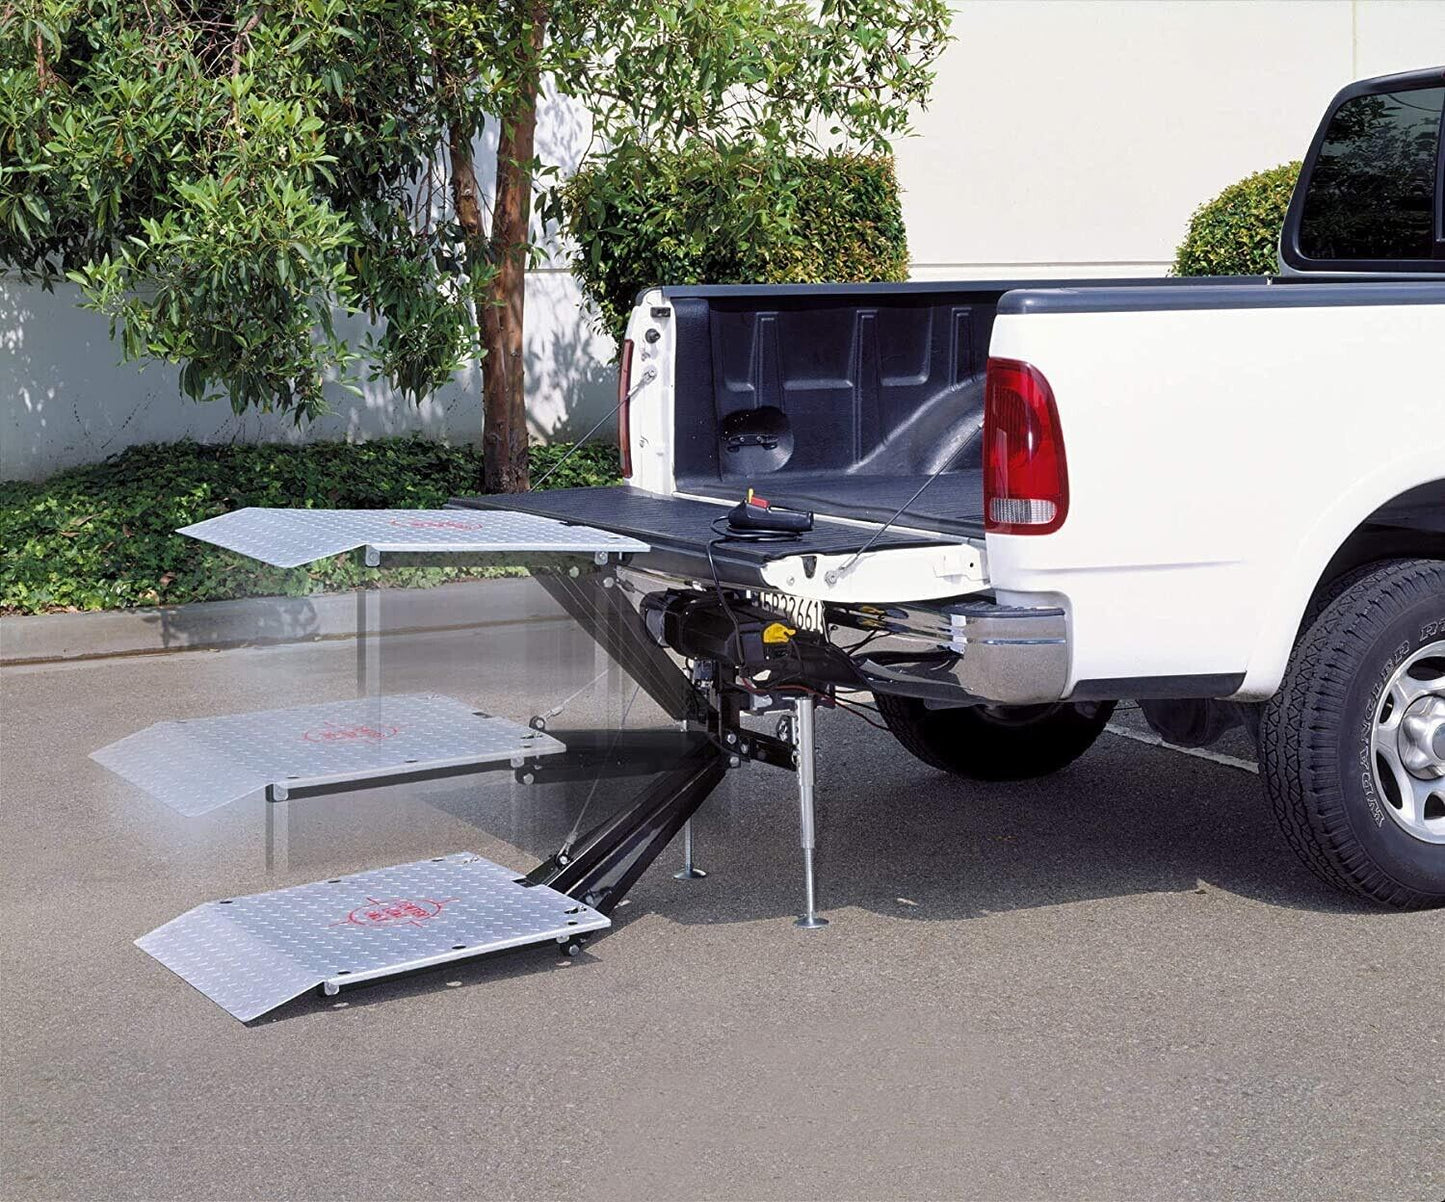 Universal Pickup Truck LIFT GATE - 549 Lbs Capacity - 12 Volt DC - 47" Lifted